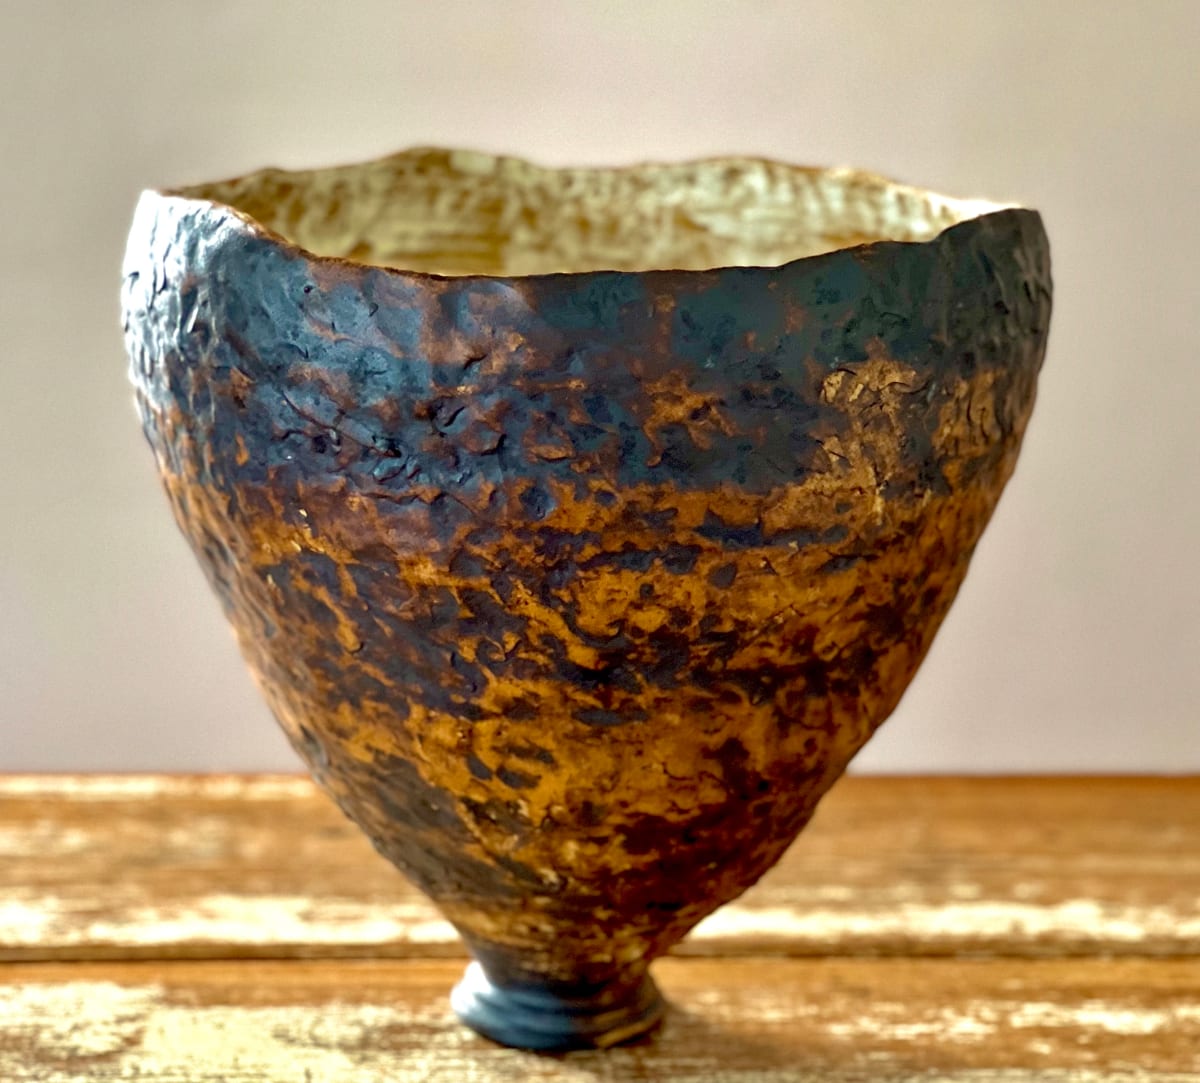 Vessel for an Armful of Justice by Jennifer K Brown  Image: Hand-built using traditional methods; exterior stained with manganese dioxide; interior brush-glazed with matte white.